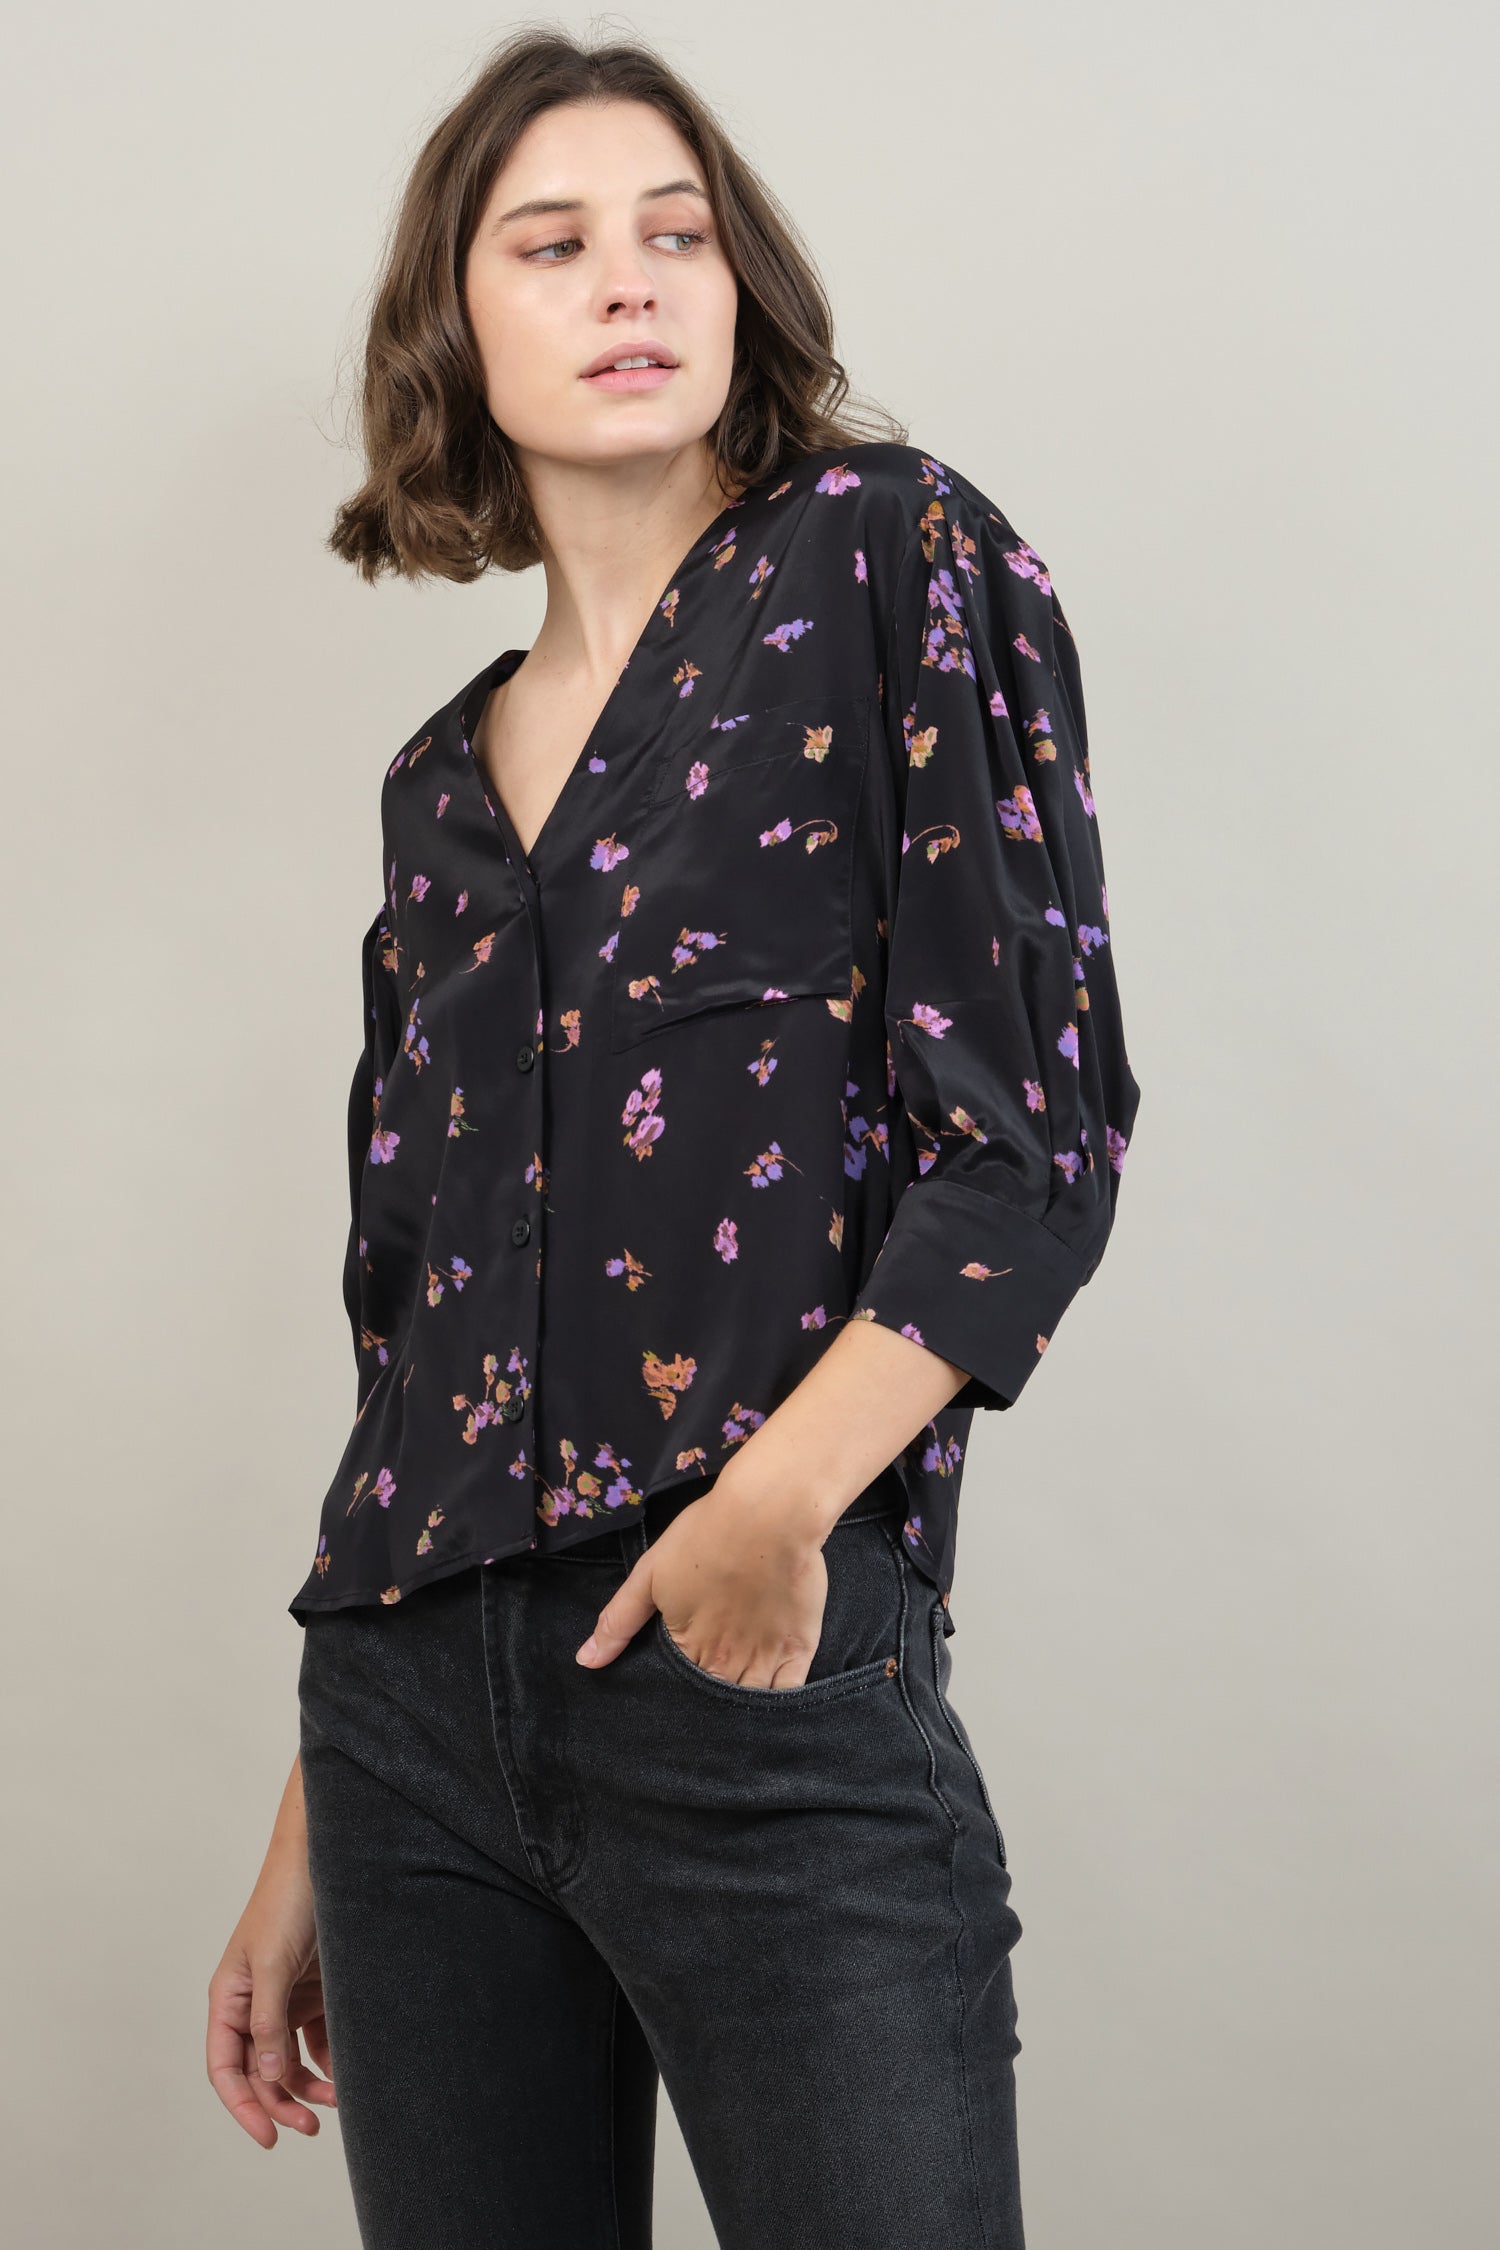 Turin Top in Violet Blossom